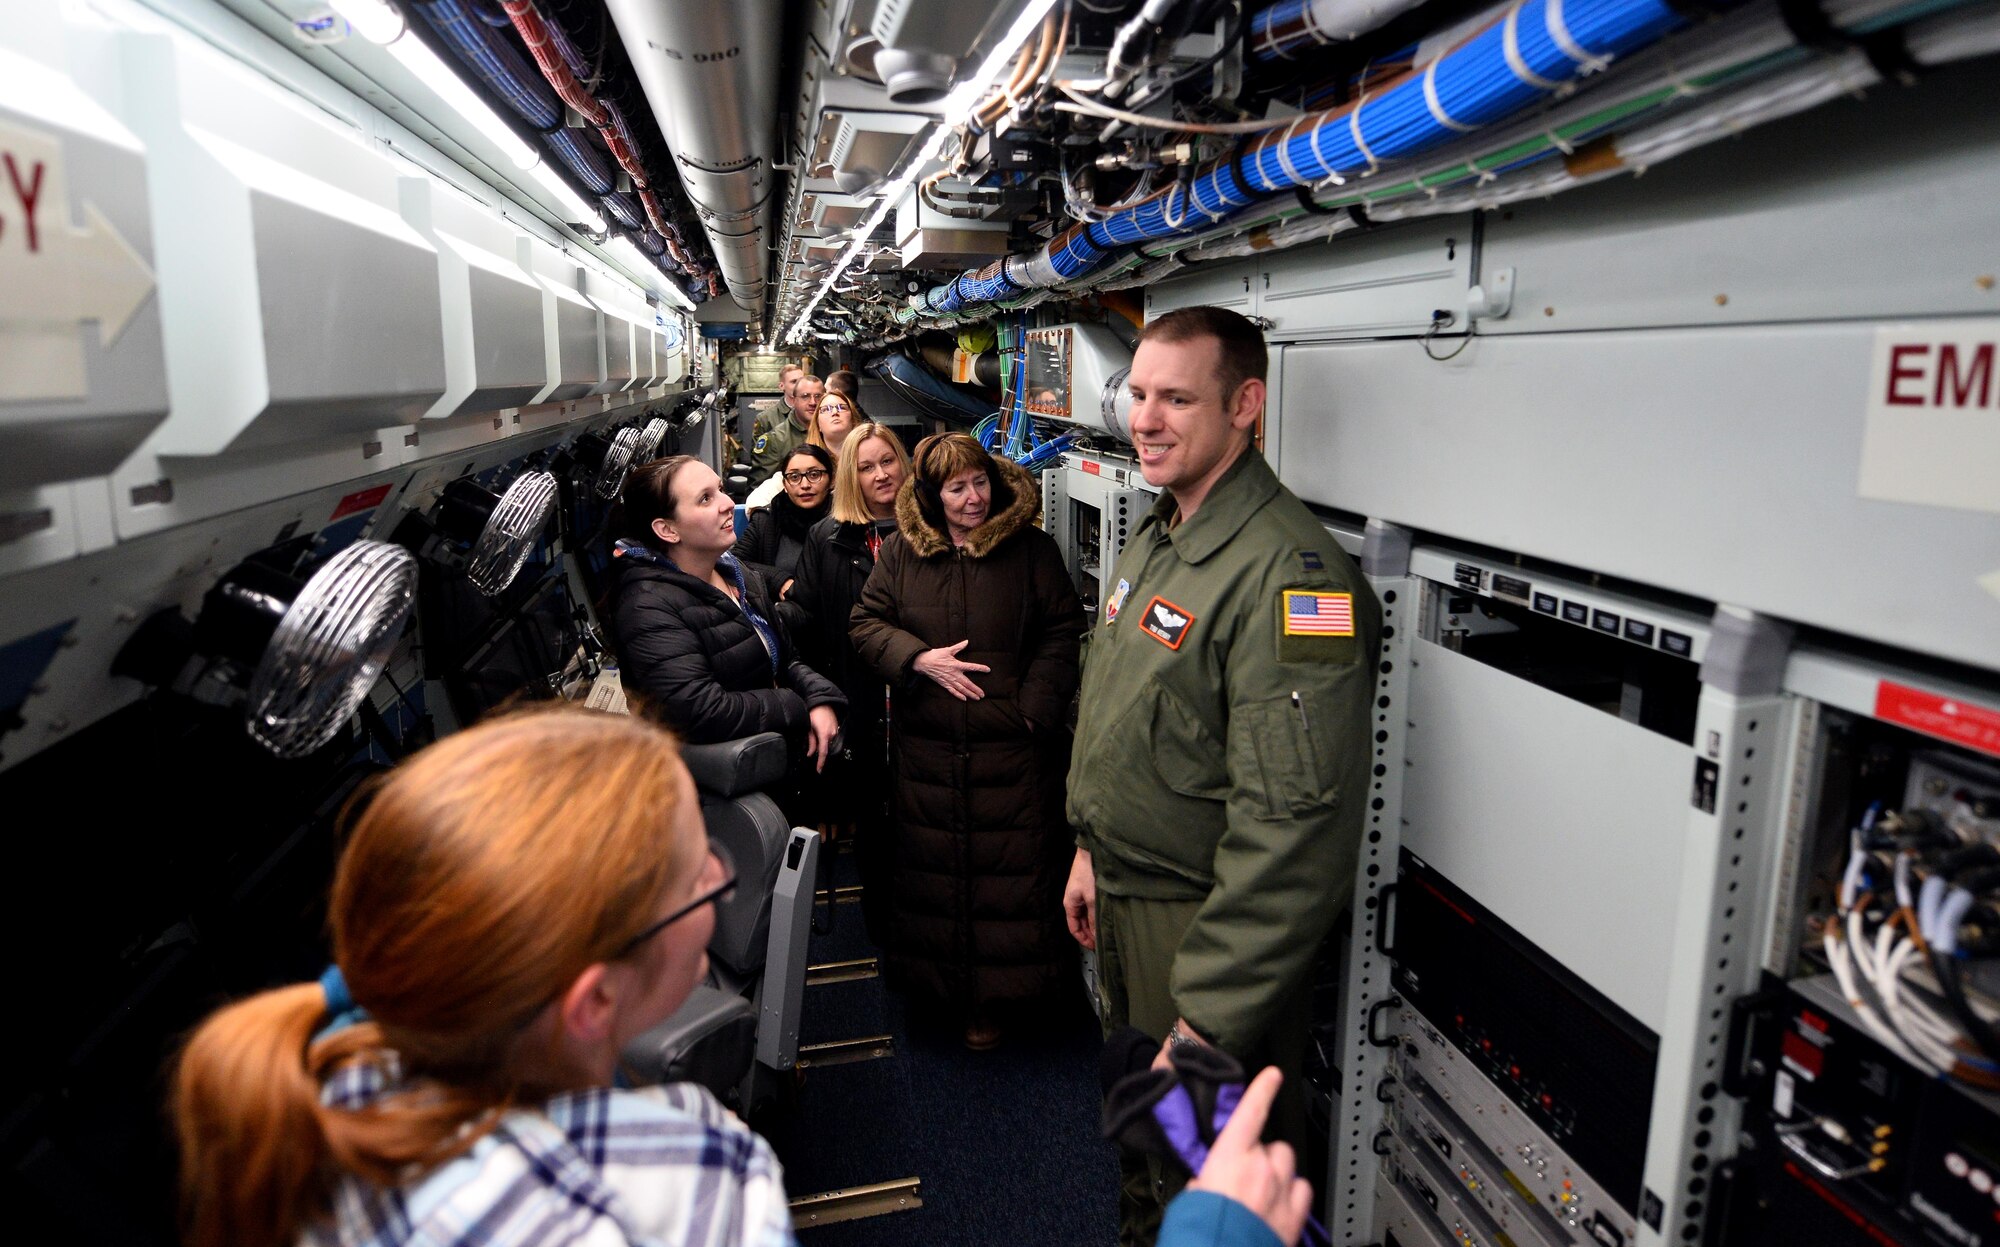 Capt. Tim Kenny, Chief of Central Flight Instructors Course with the 338th Combat Training Squadron, answers questions from military spouses touring an RC-135 Aircraft parked in a hangar of the Bennie Davis Maintenance Facility as part of Spouse Appreciation Night, Dec. 7, 2016, at Offutt Air Force Base, Neb. This was the first, of many, wing spouse tours.  The tour itinerary began with a briefing followed by a state-of-the-art flight simulator and ending with an aircraft tour. (U.S. Air Force photo by Josh Plueger)